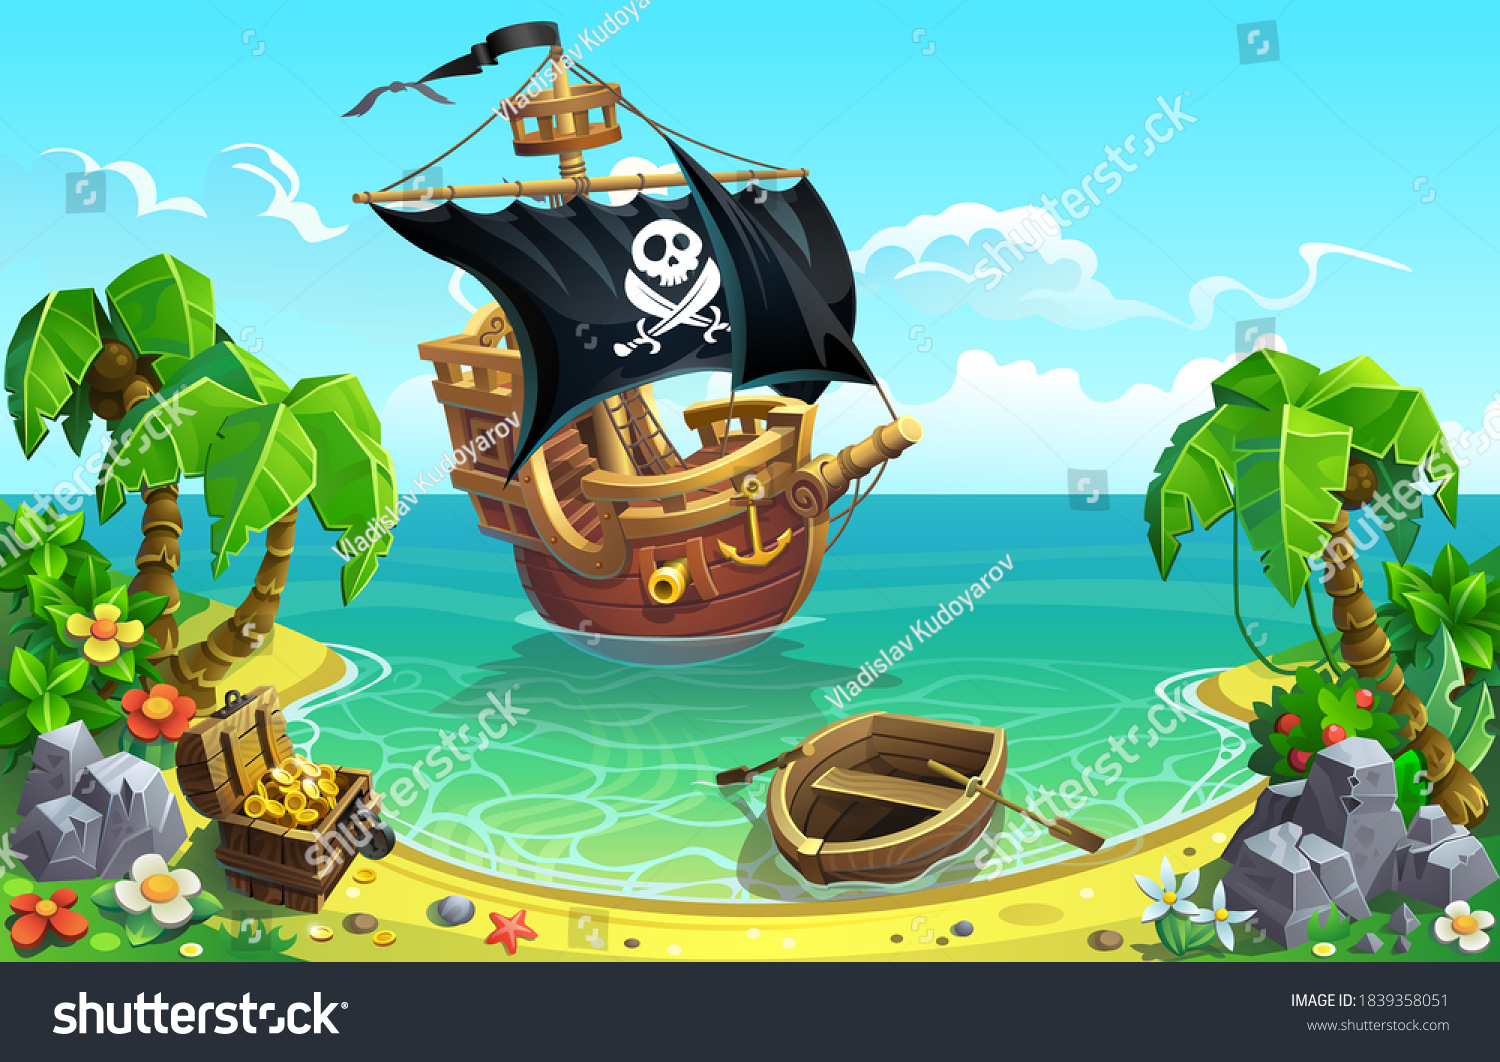 SVG of Pirate sailing ship and treasure chest in the bay of a tropical island with palm trees. svg